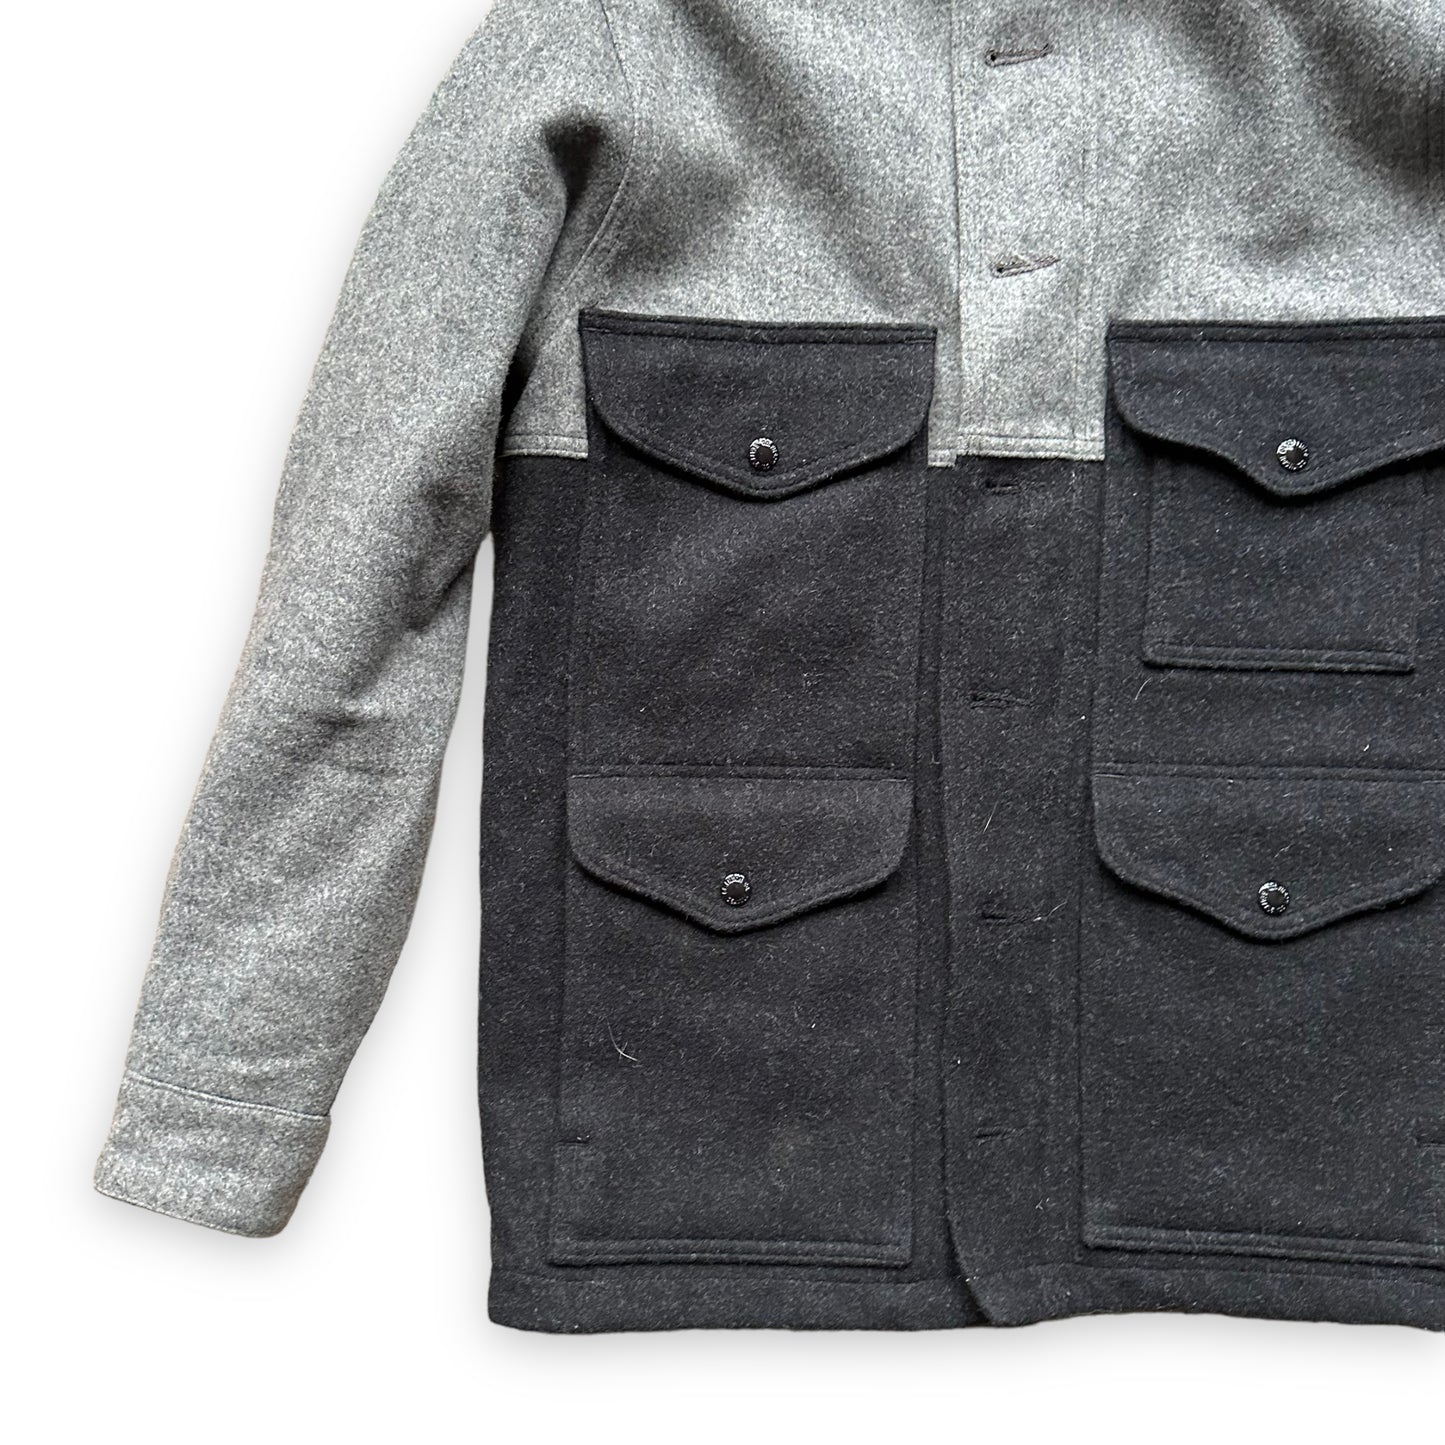 Front Right View of Filson Black and Grey Mackinaw Wool Cruiser SZ XS |  Filson Jackets Seattle | Barn Owl Vintage